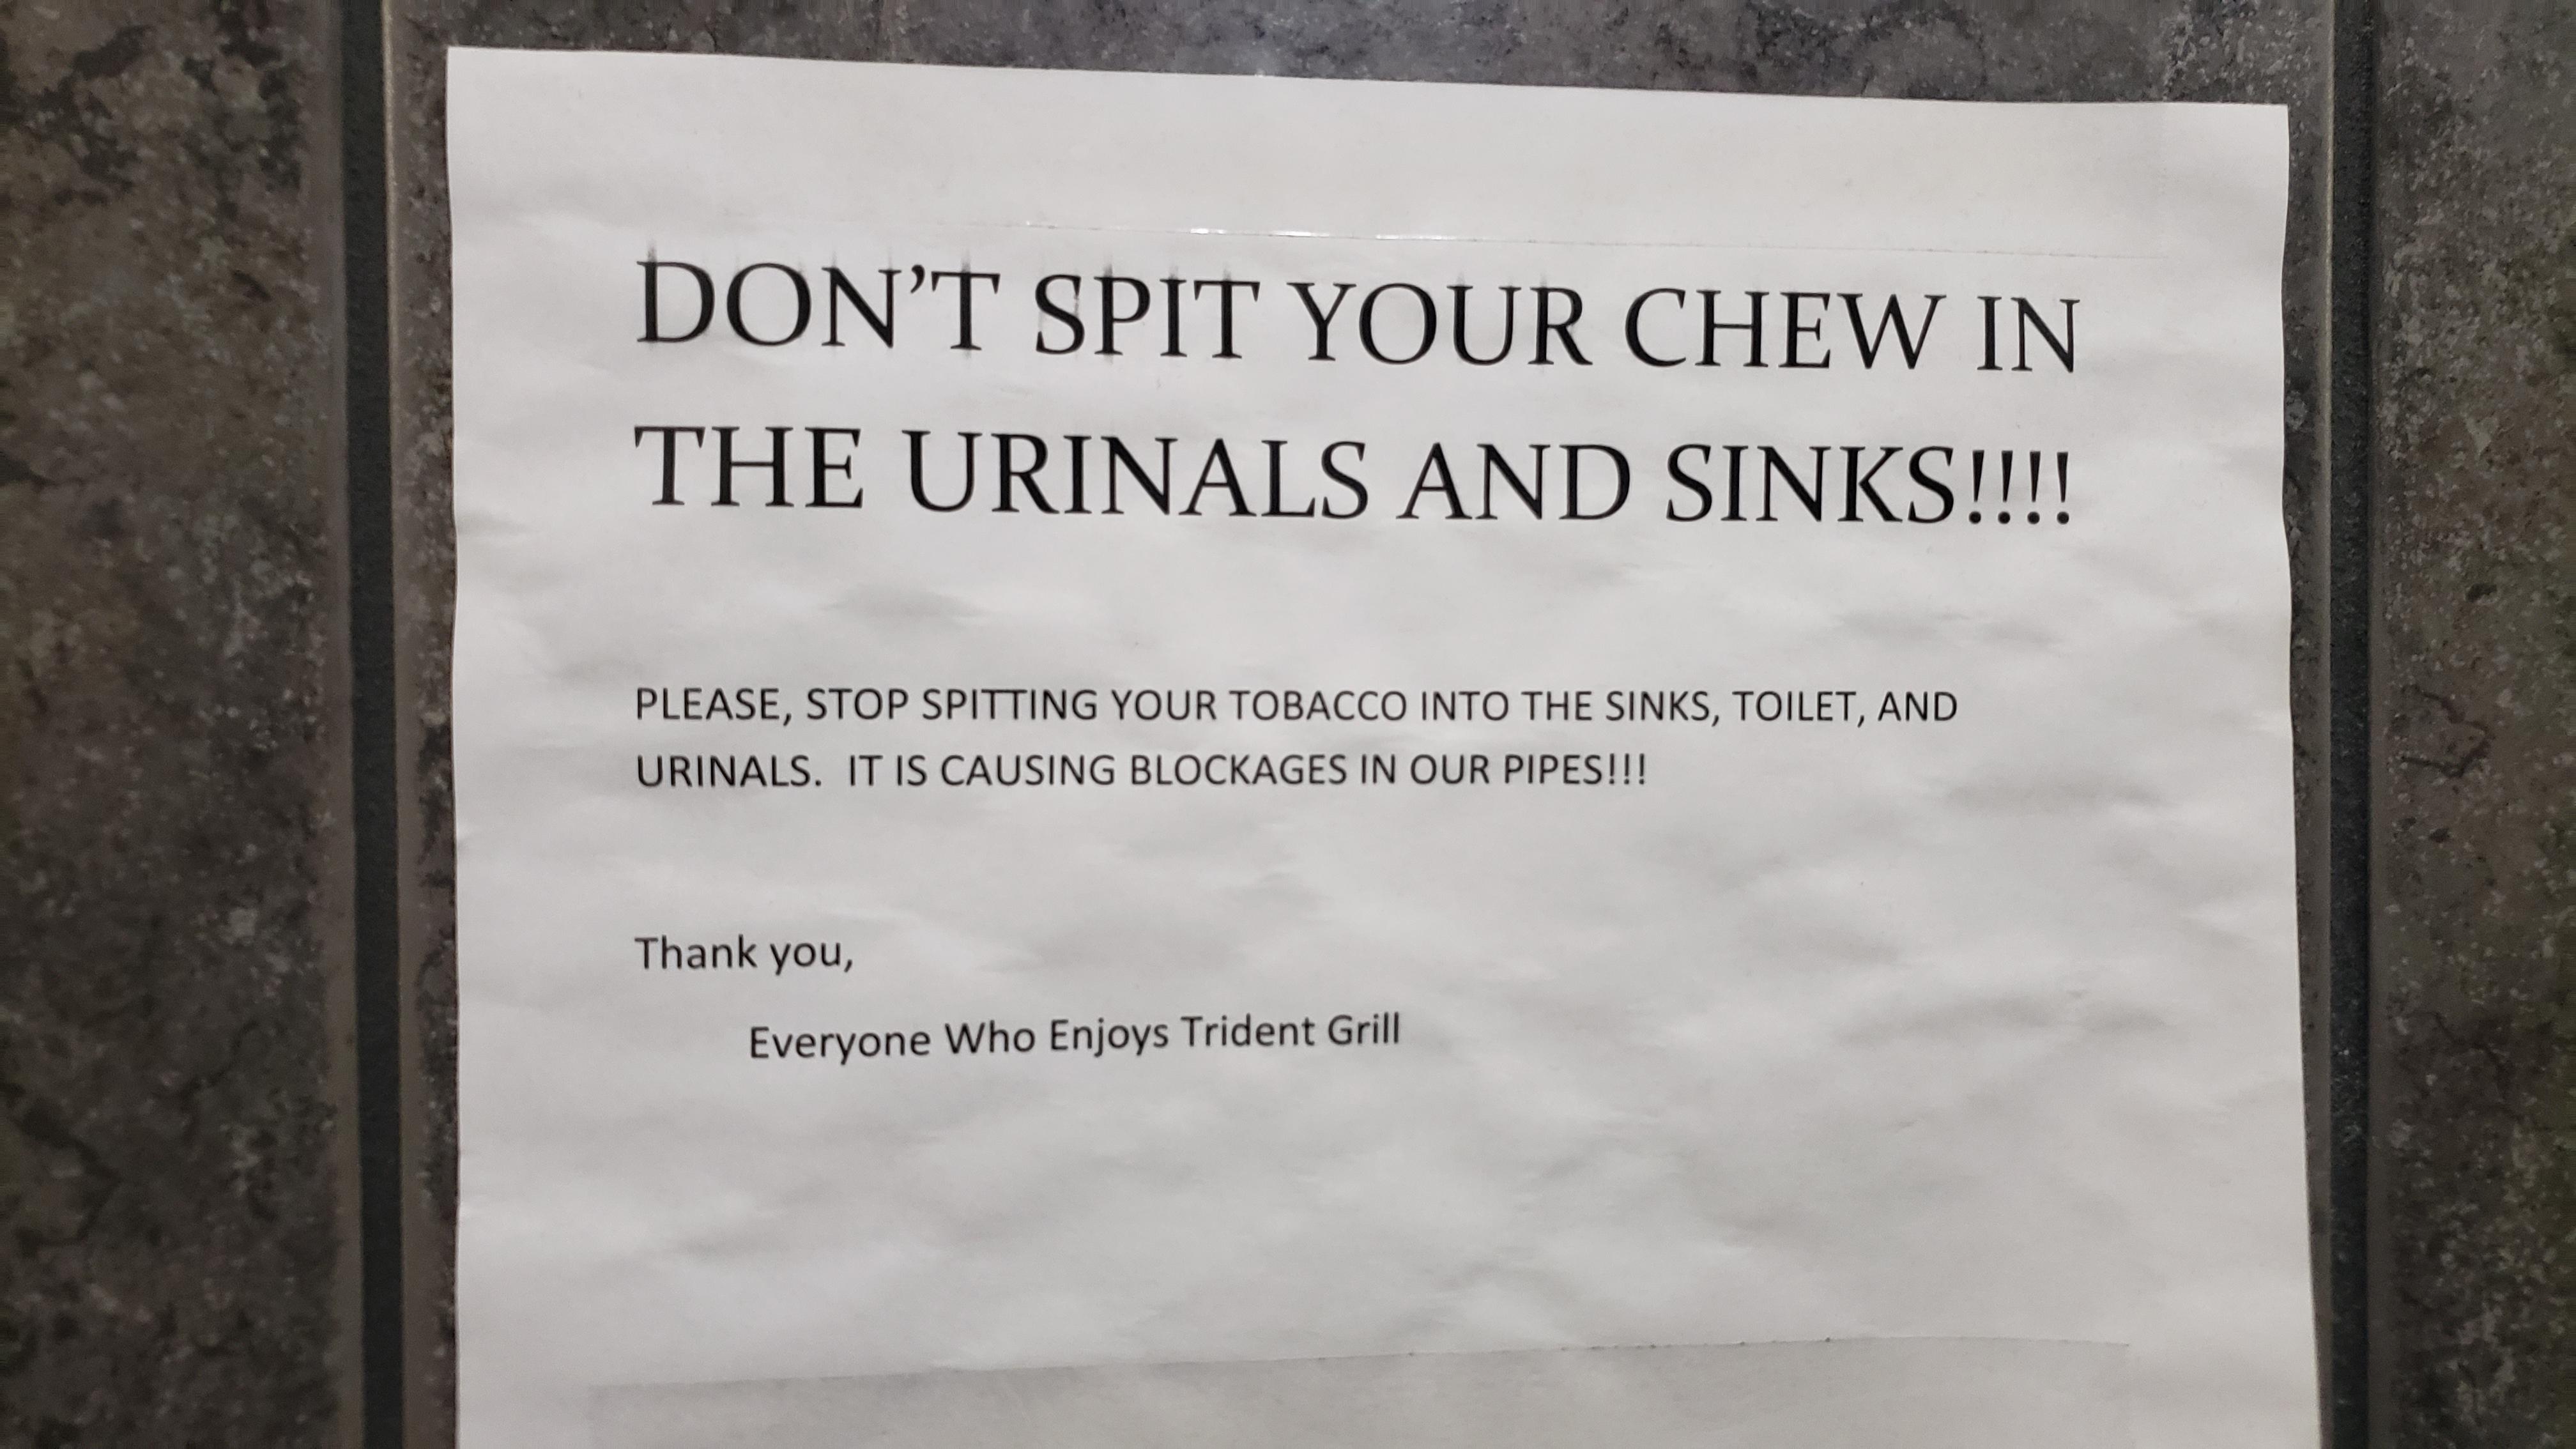 commemorative plaque - Don'T Spit Your Chew In The Urinals And Sinks!!!! Please, Stop Spitting Your Tobacco Into The Sinks, Toilet, And Urinals. It Is Causing Blockages In Our Pipes!!! Thank you, Everyone who Enjoys Trident Grill